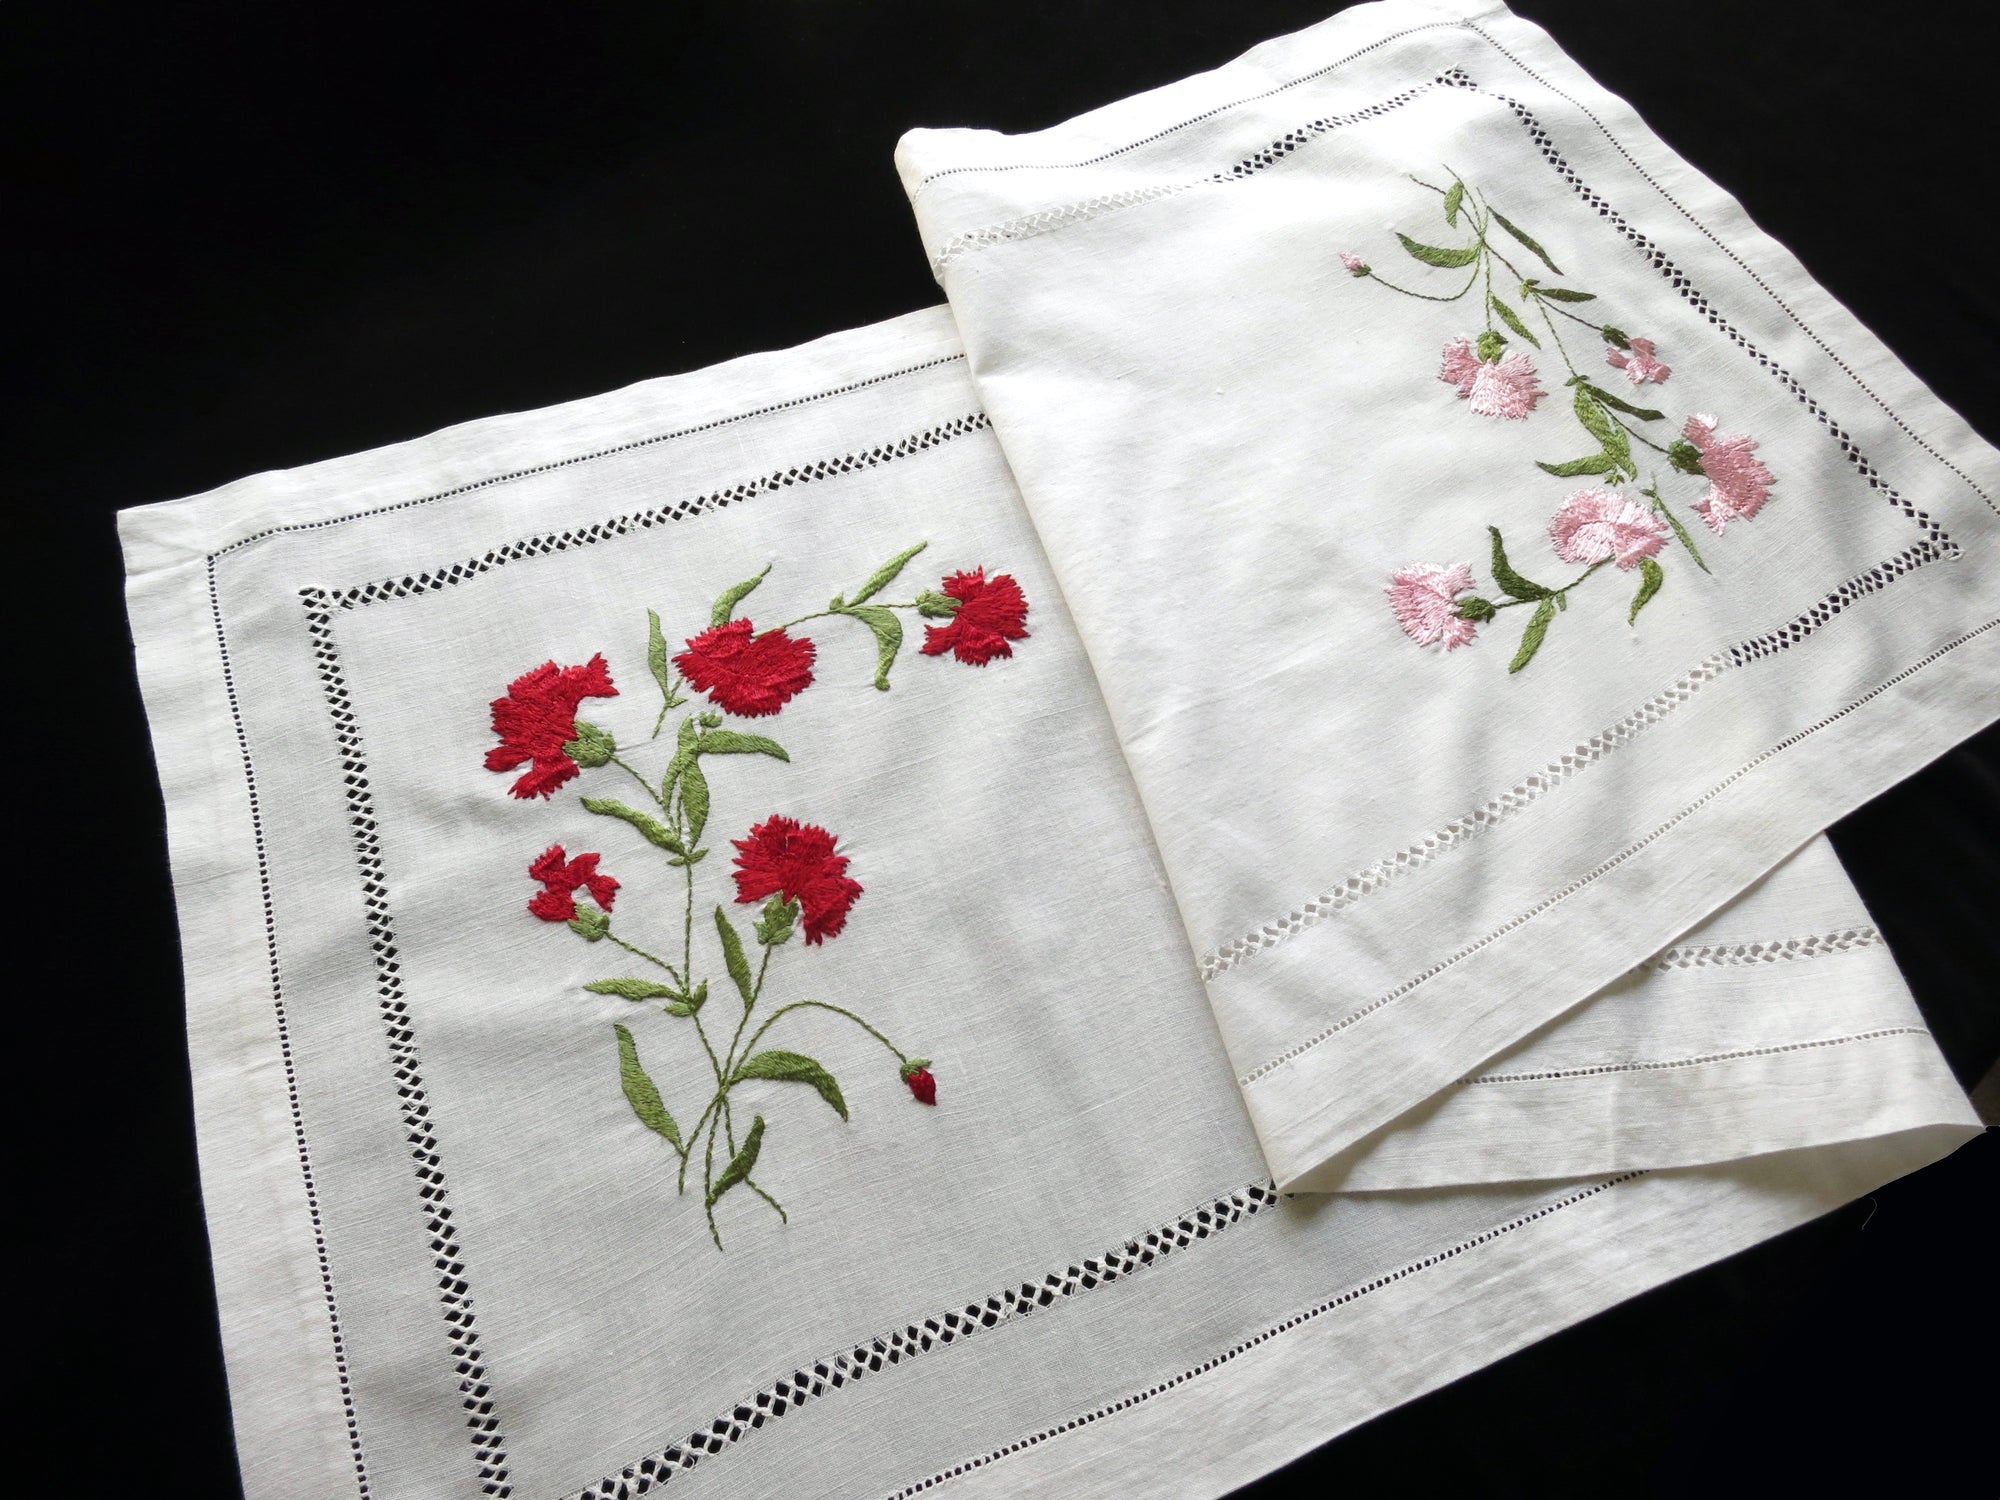 Carnations in Red & Pink Vintage Embroidered Linen Table Runner 17x48"